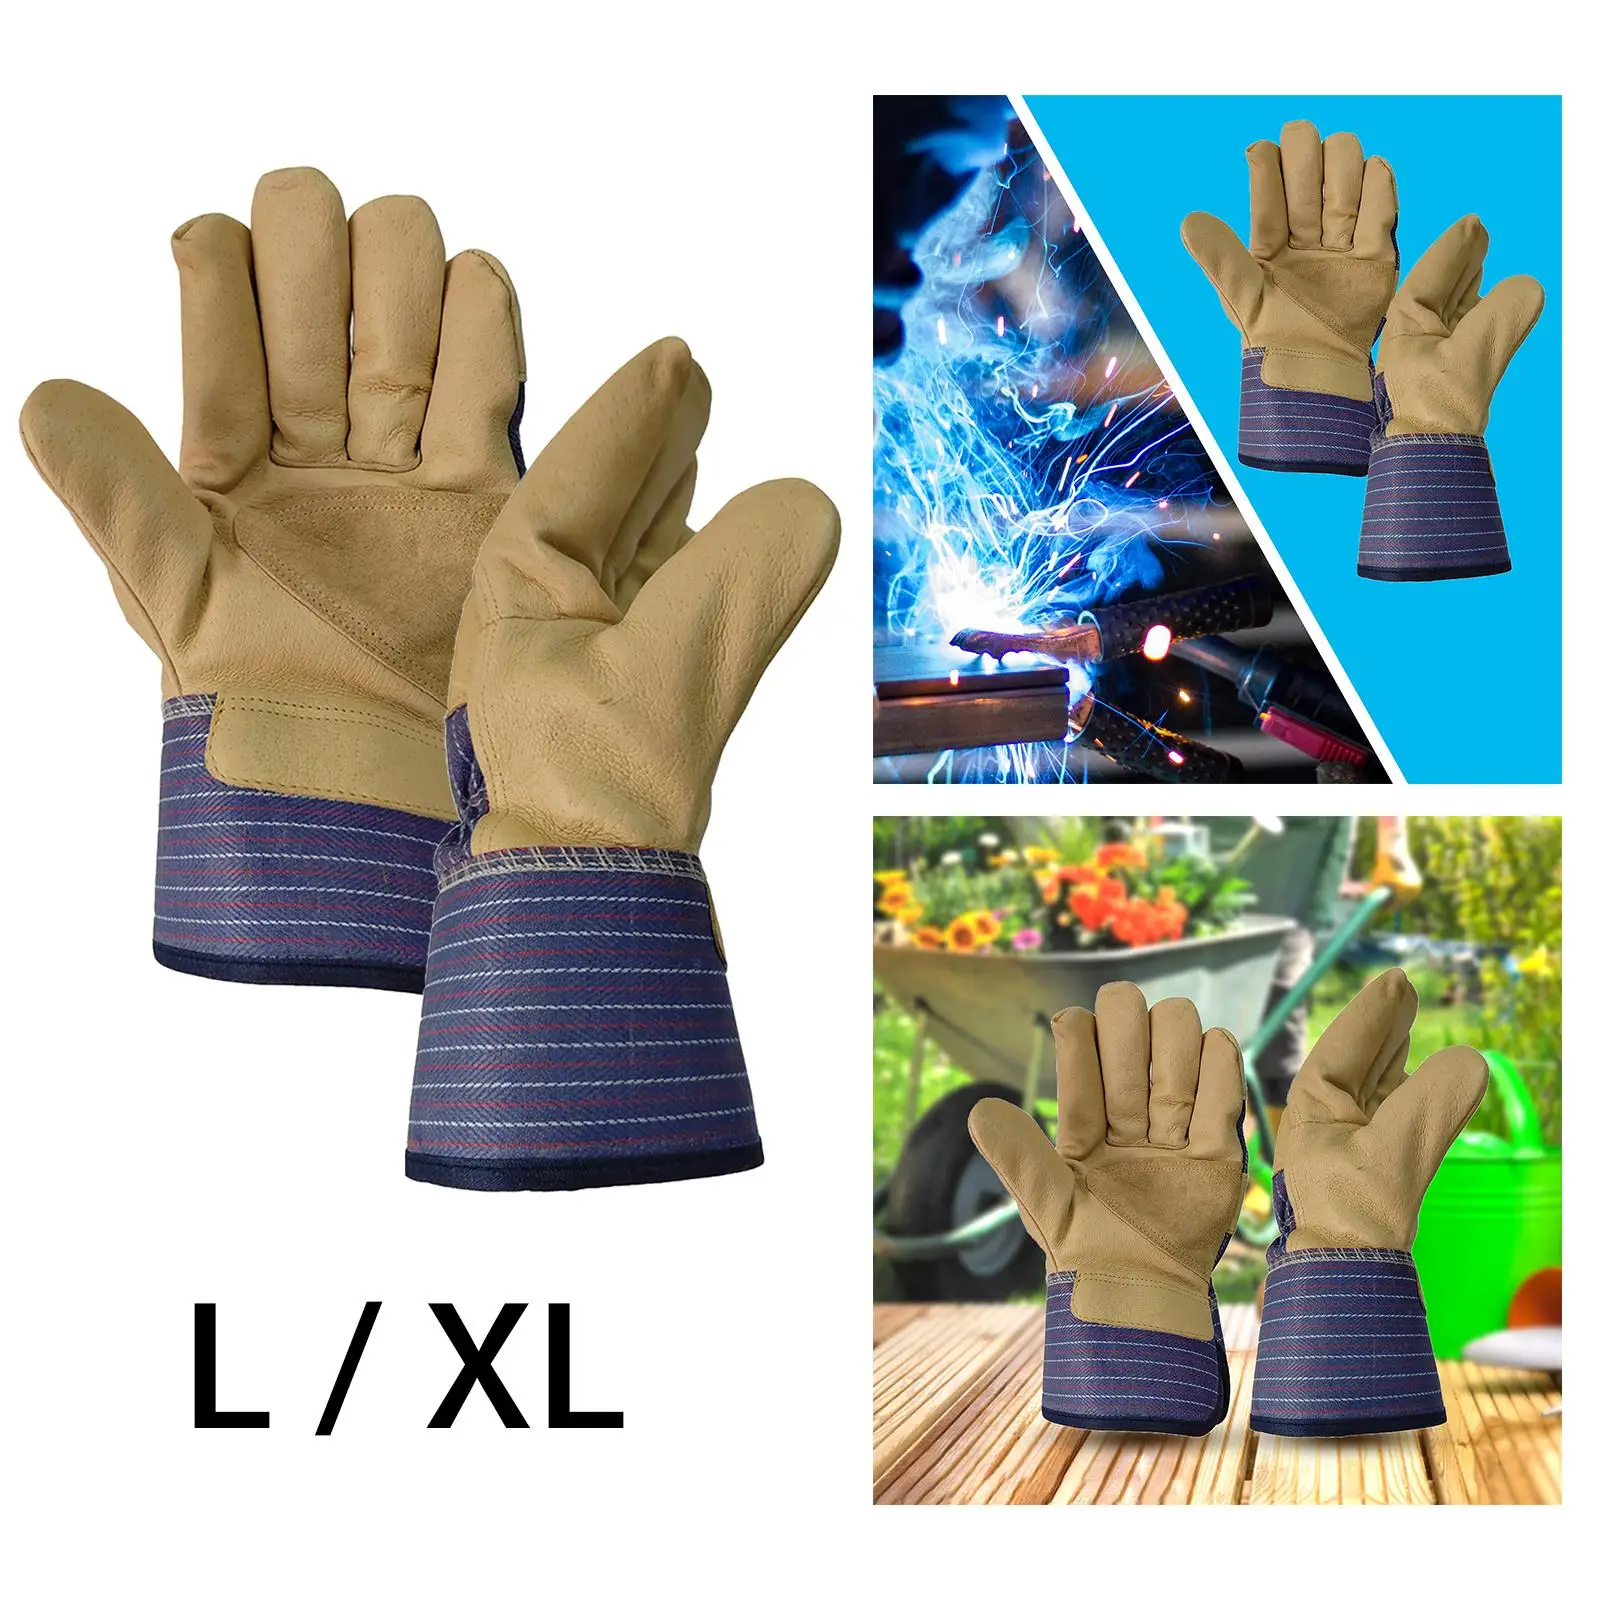 PU Leather Welding Gloves Soft Flexible Heat Insulation Anti Slip Welding Accessories Protective Gloves for Pot Holder Furnace